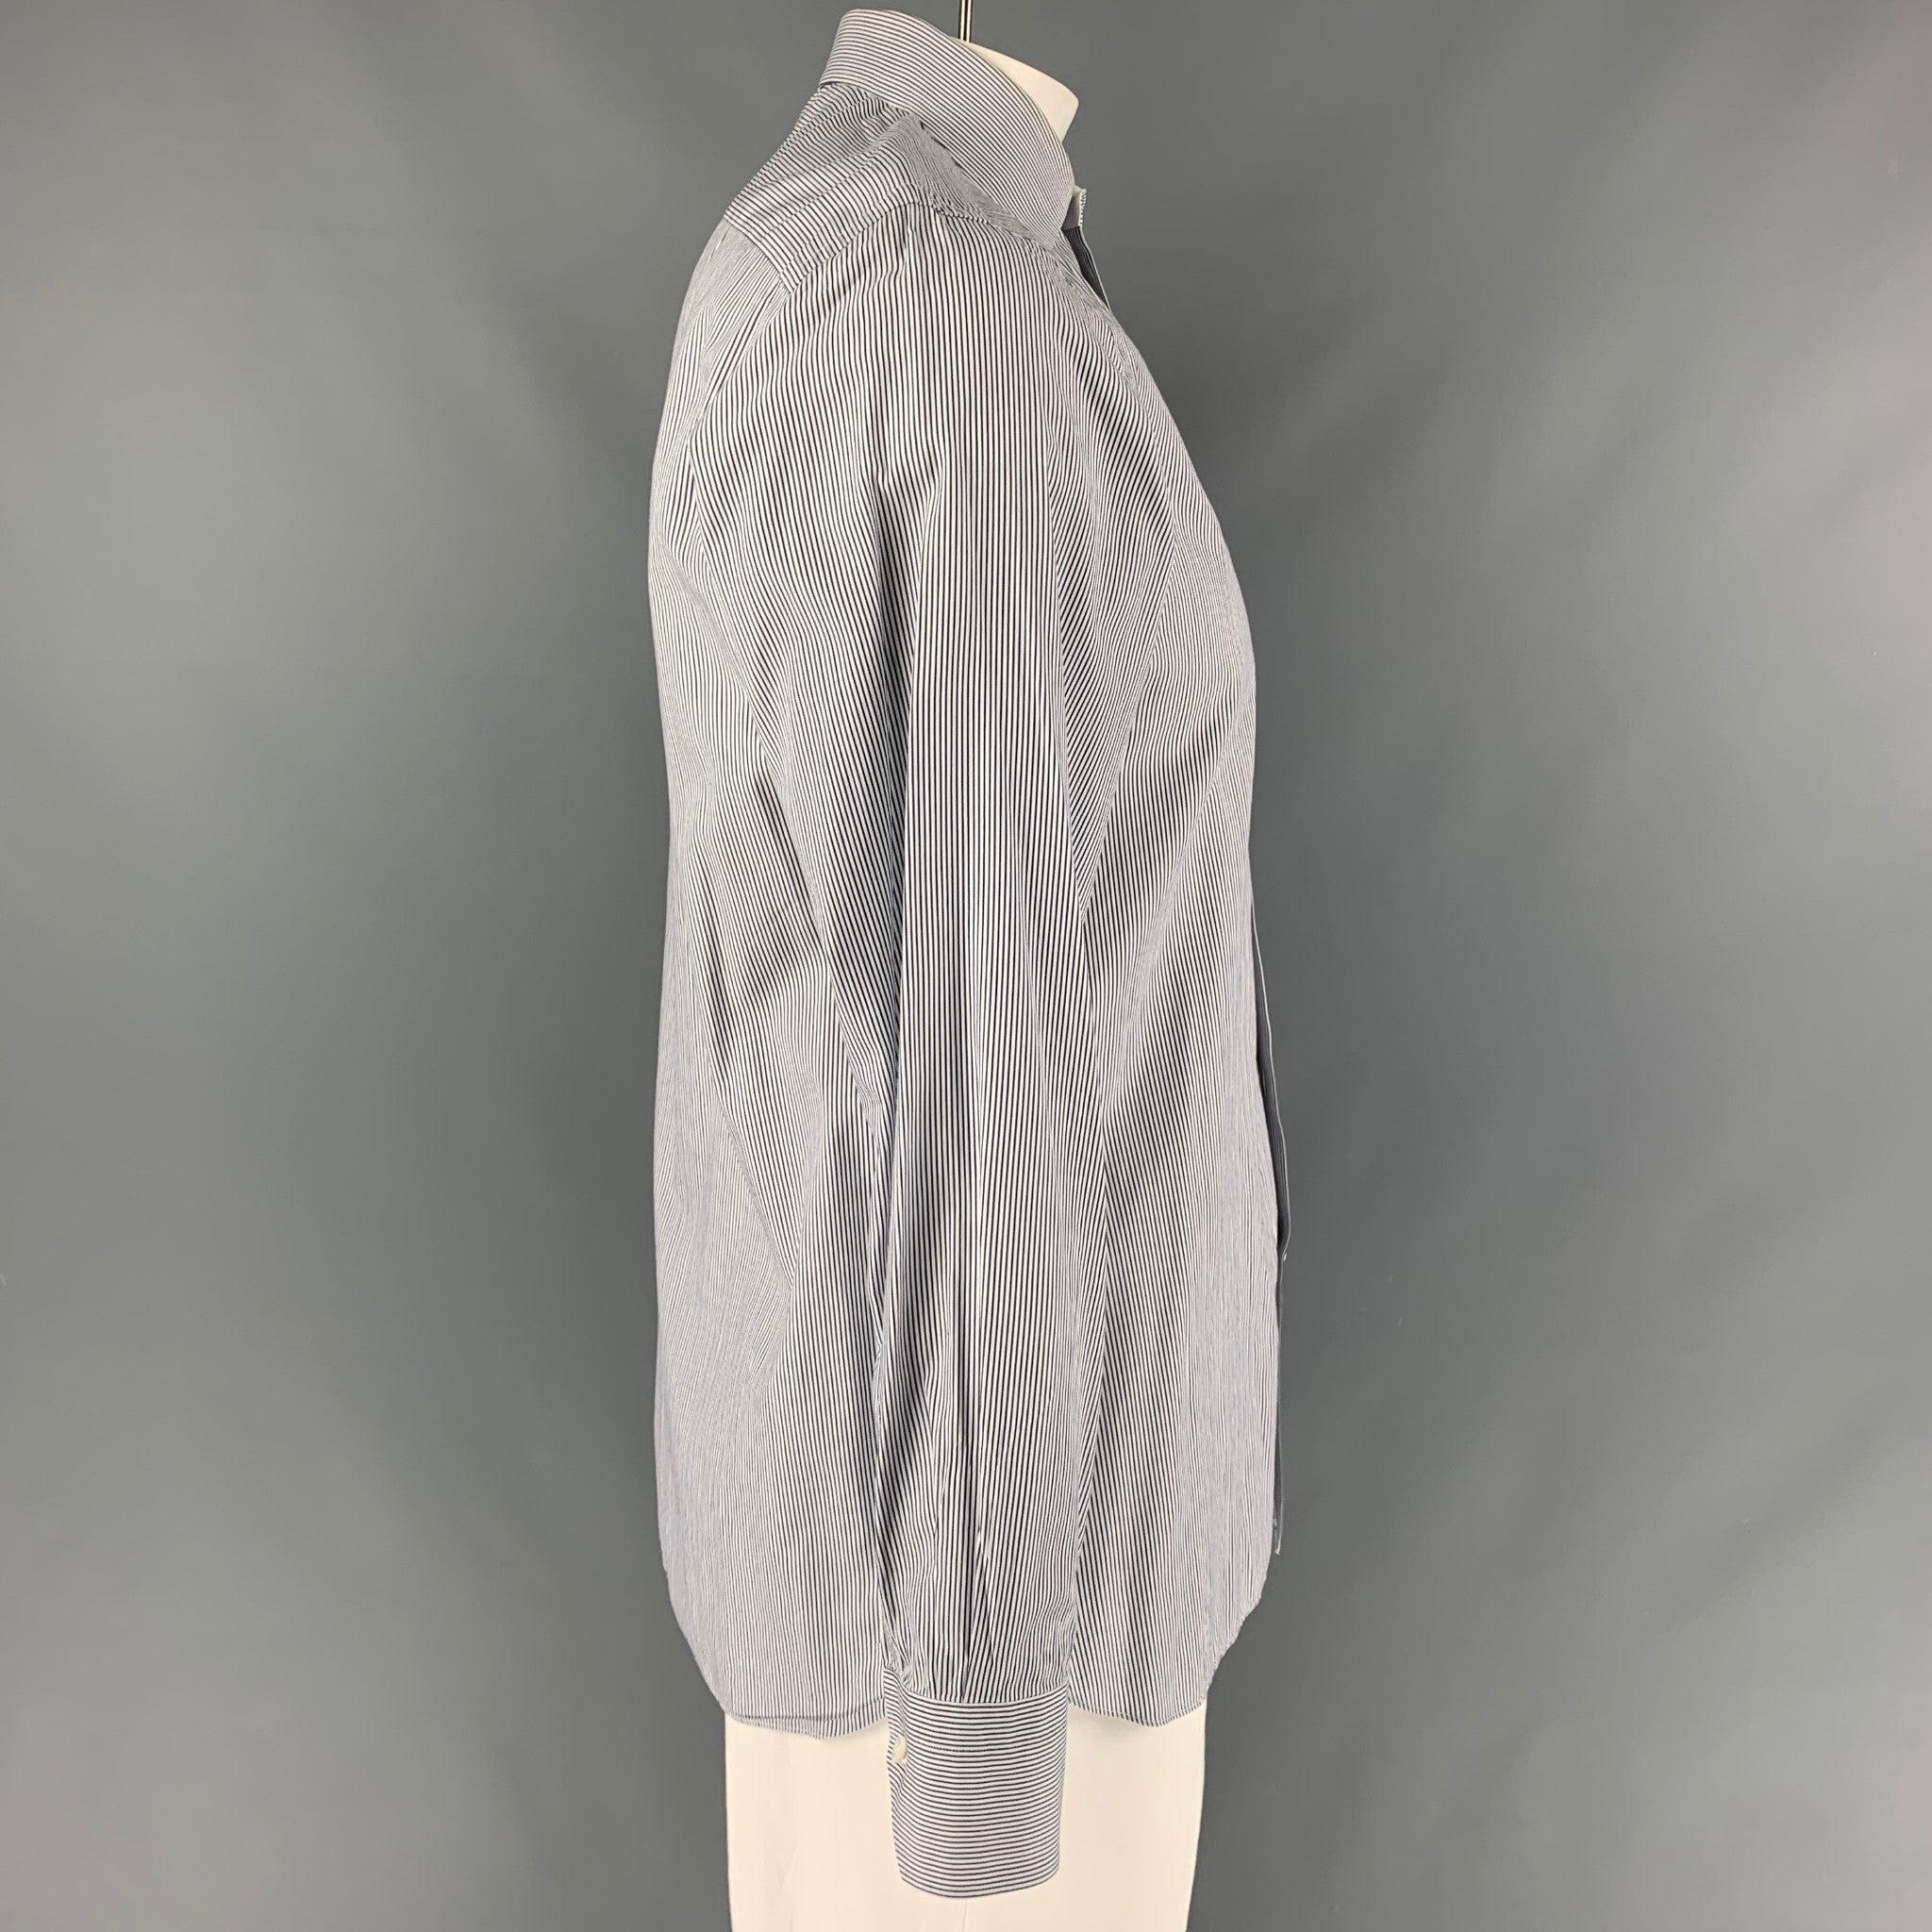 ERMENEGILDO ZEGNA Slim Fit long sleeve shirt comes in a black and white stripped cotton featuring a spread collar, and a button up closure. Very Good Pre-Owned Condition. 

Marked:   41/16 

Measurements: 
 
Shoulder: 19 inches Chest: 46 inches